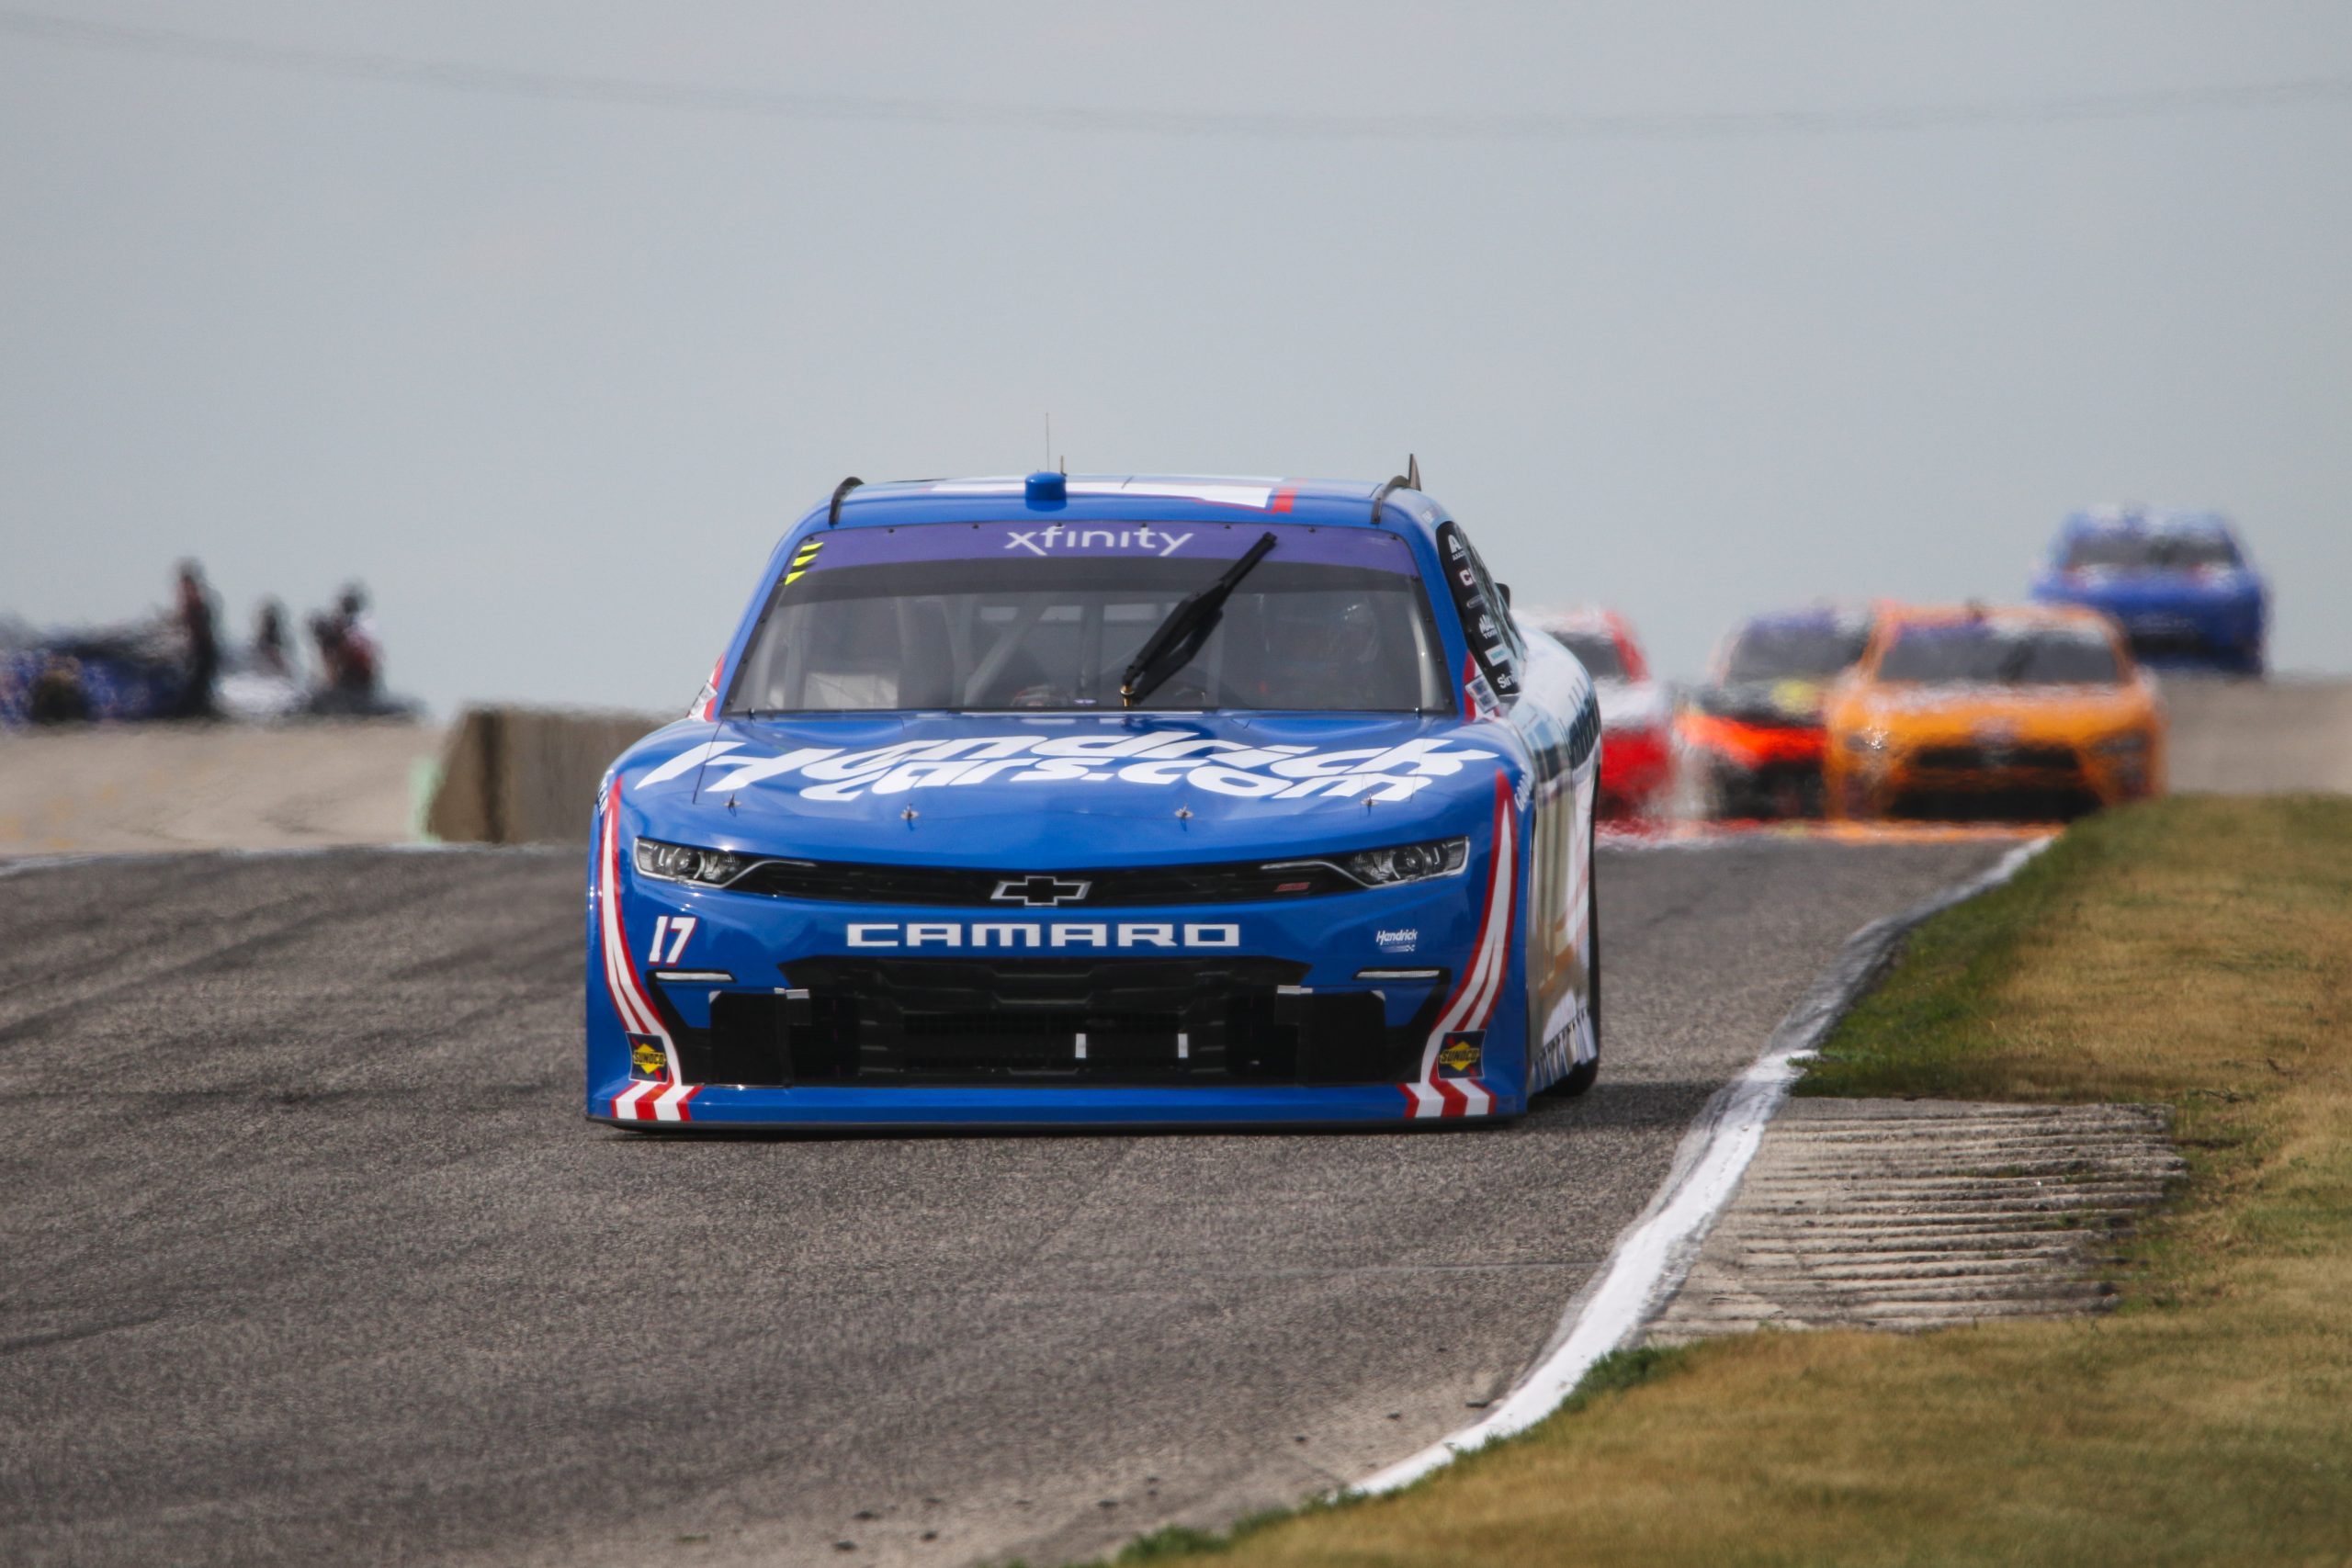 All in all, Larson had a solid Road America weekend. (Photo: Logan Skidan | The Podium Finish)